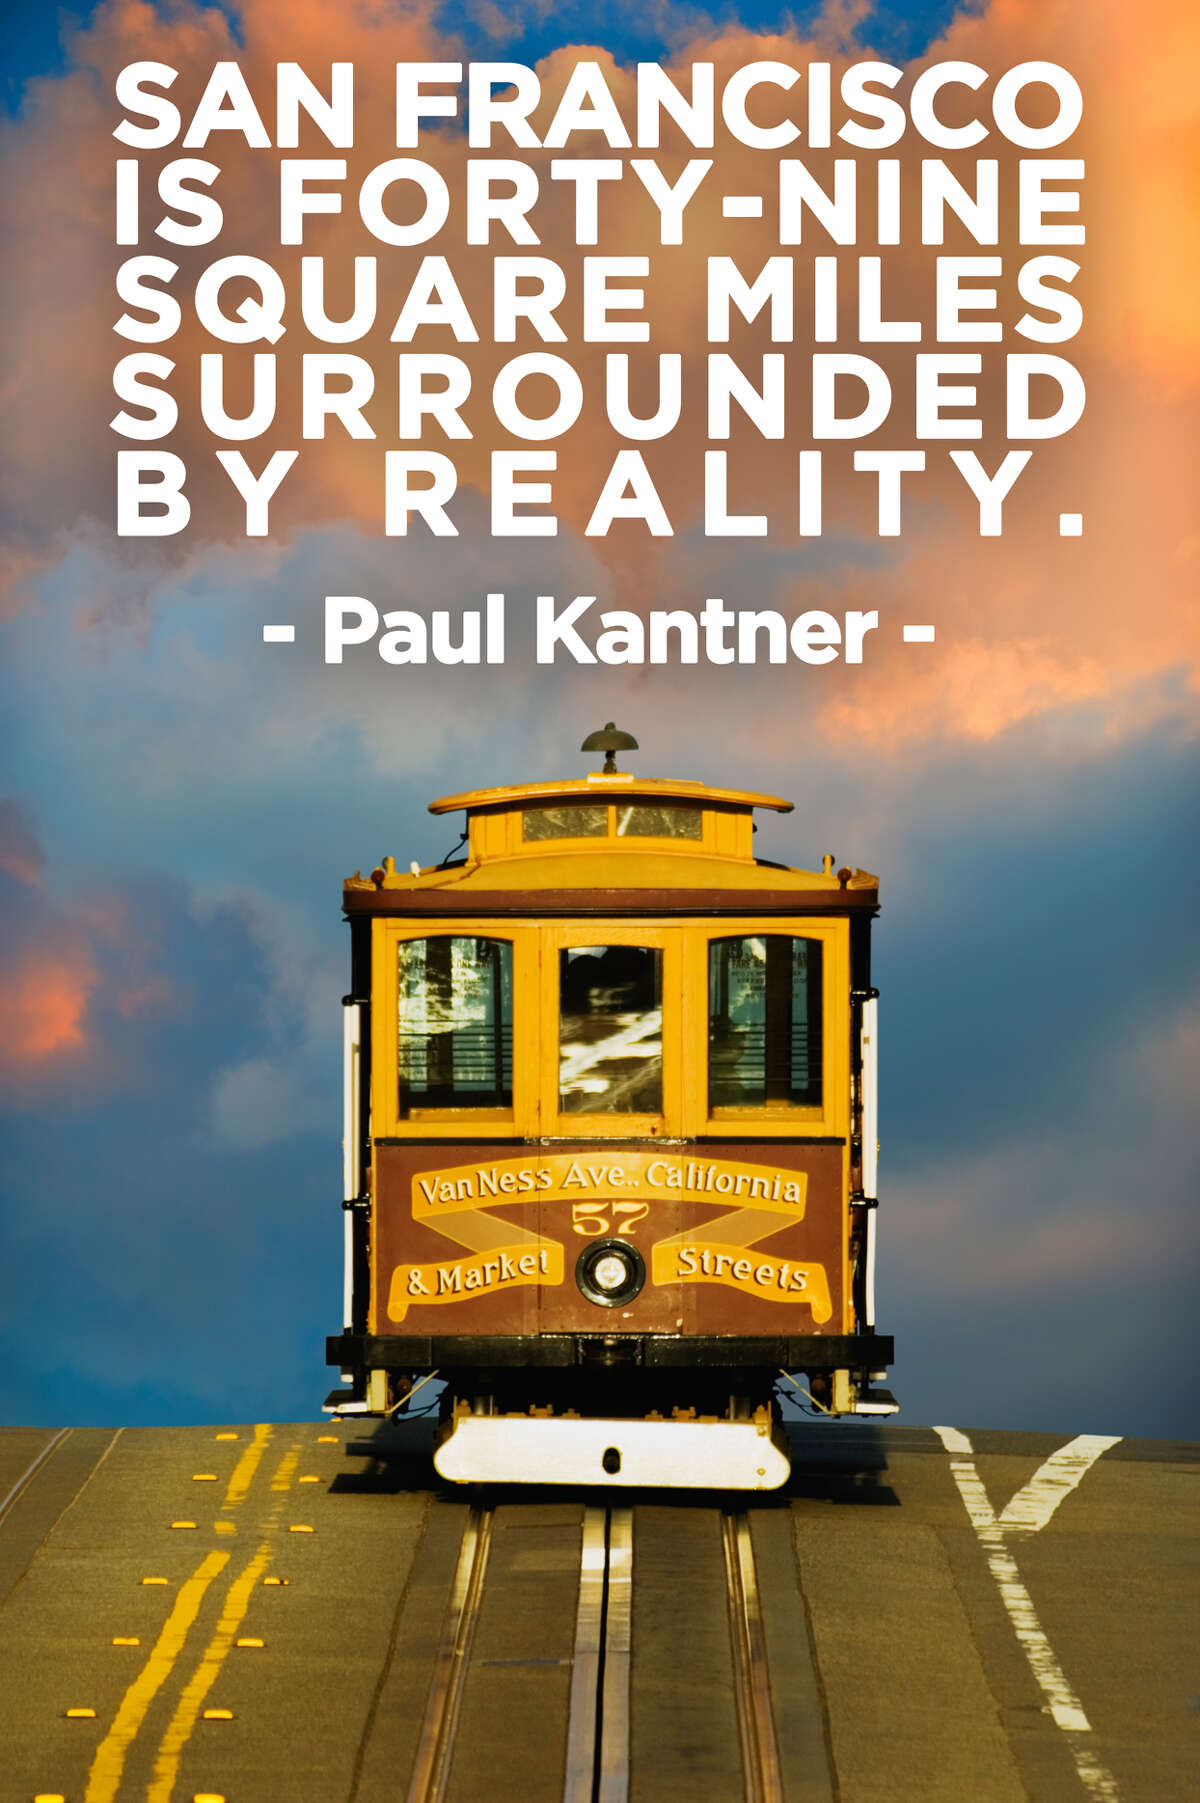 20 of our favorite quotes about San Francisco